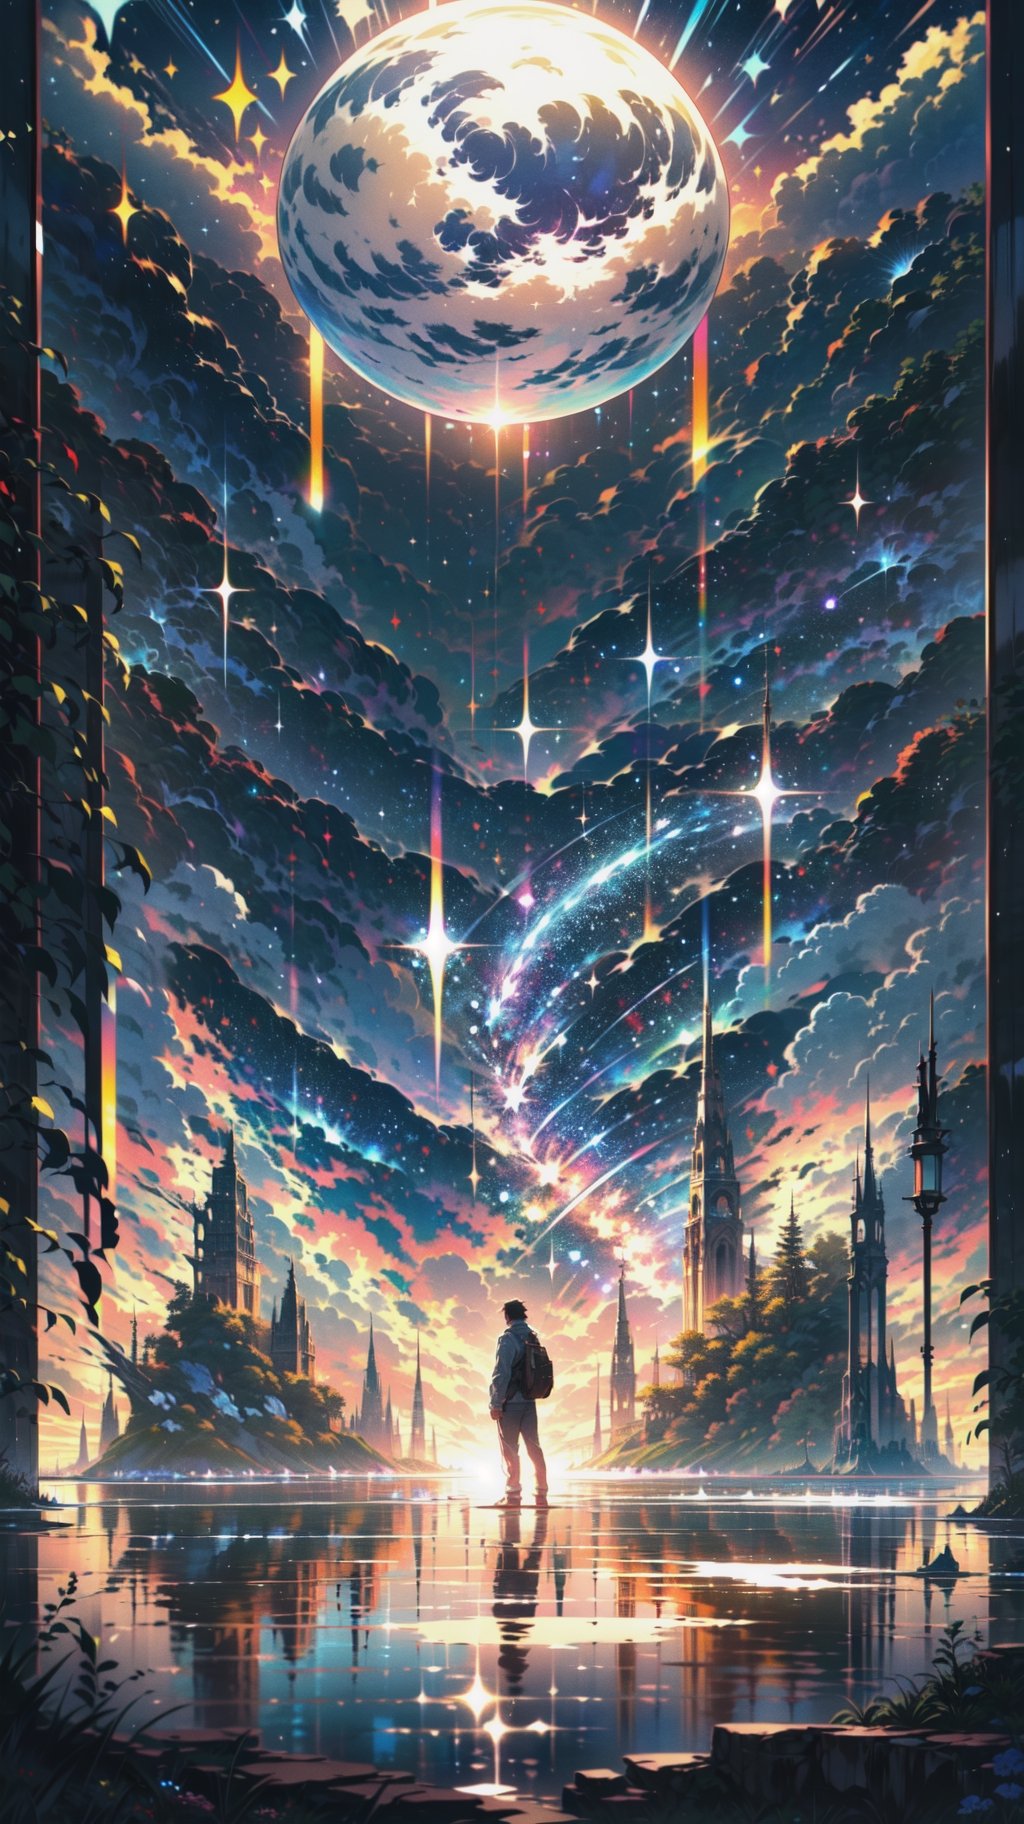 (8k uhd, masterpiece, best quality, high quality), 8K UHD, (man), image is a stunning piece of digital art that transports you to a fantastical landscape. The sky is a cosmic tapestry, filled with stars and nebulae, creating a backdrop for a large, imposing planet. Below this celestial spectacle, the landscape unfolds with rocky cliffs that border a serene body of water. A small boat can be seen on the water, adding a touch of life to the scene. The colors used in the image are strikingly vibrant, enhancing the dreamlike quality of the overall composition,sle